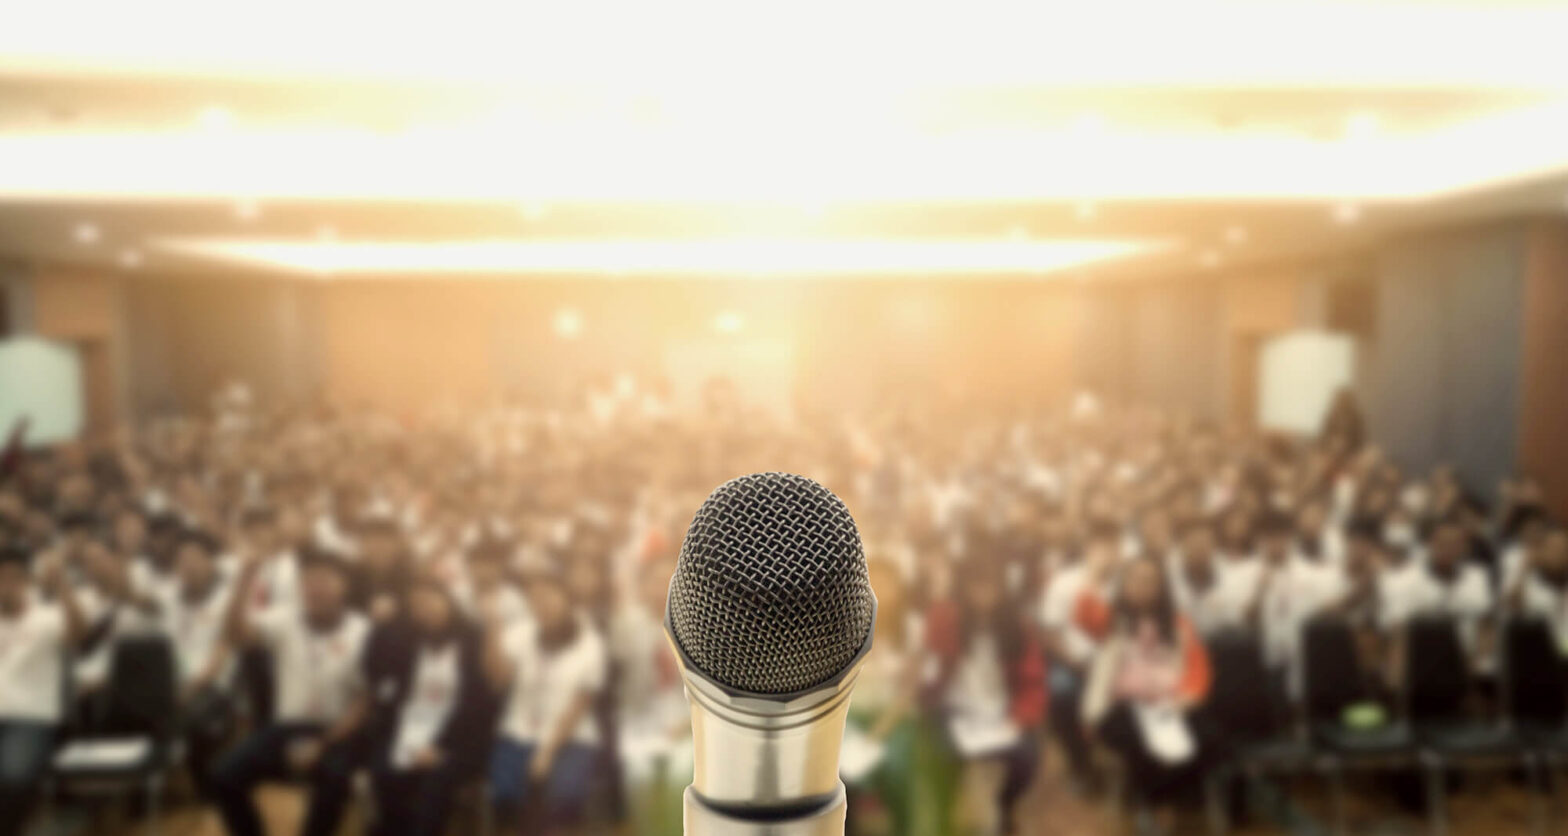 How to Improve My Public Speaking Skills in One Weekend?